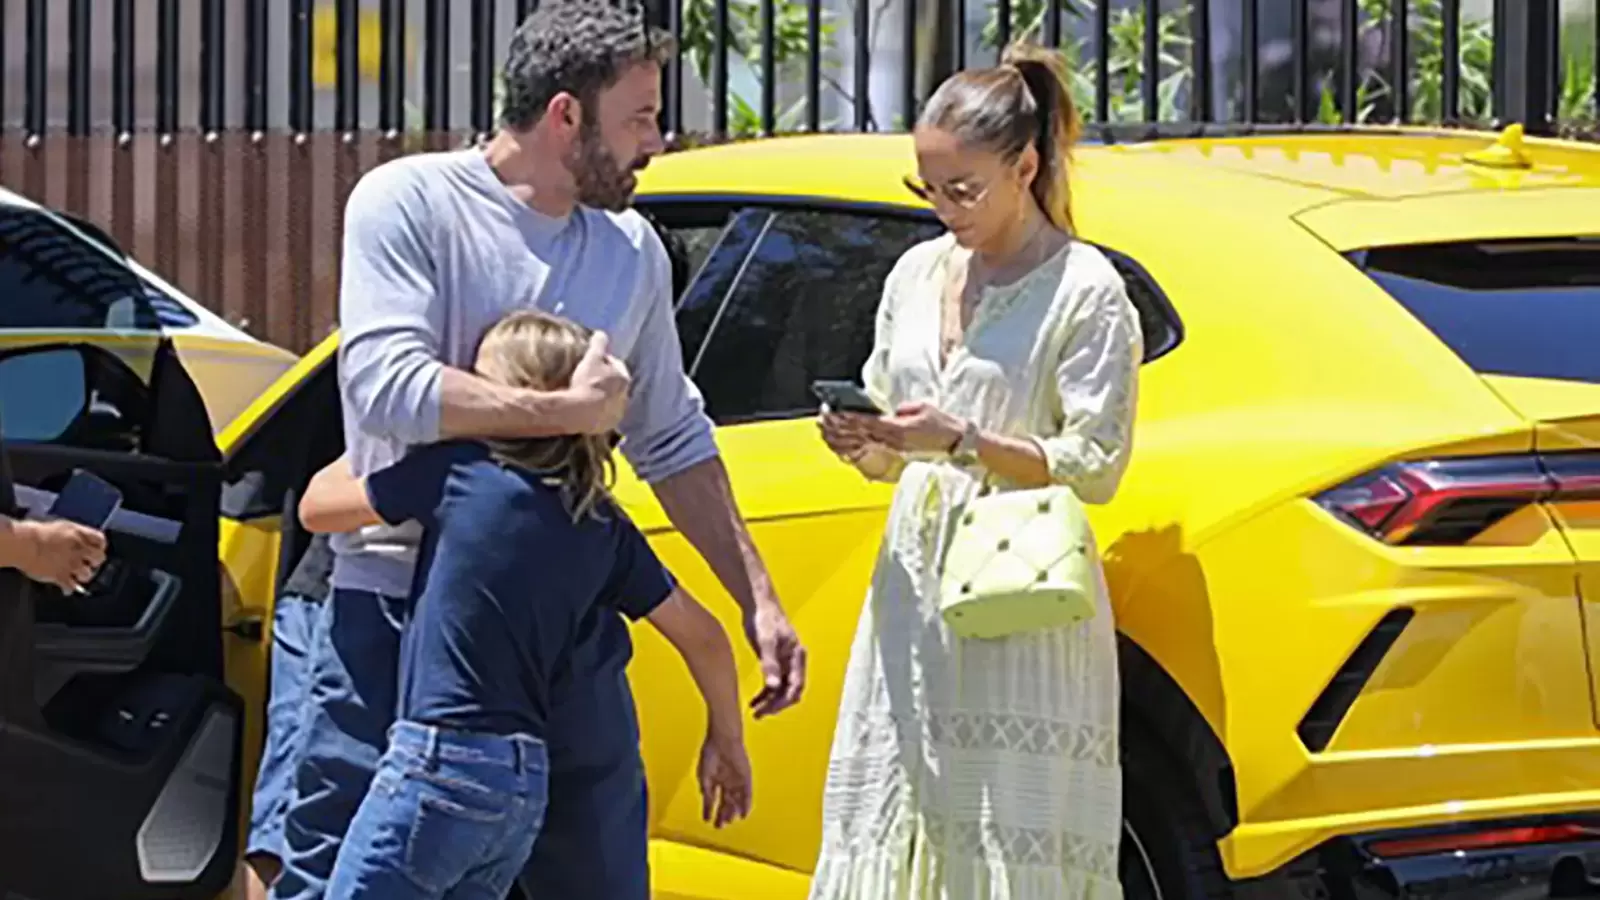 Ben Affleck’s 10-year-old son crashes ₹3-crore Lamborghini during outing with Jennifer Lopez. See pics